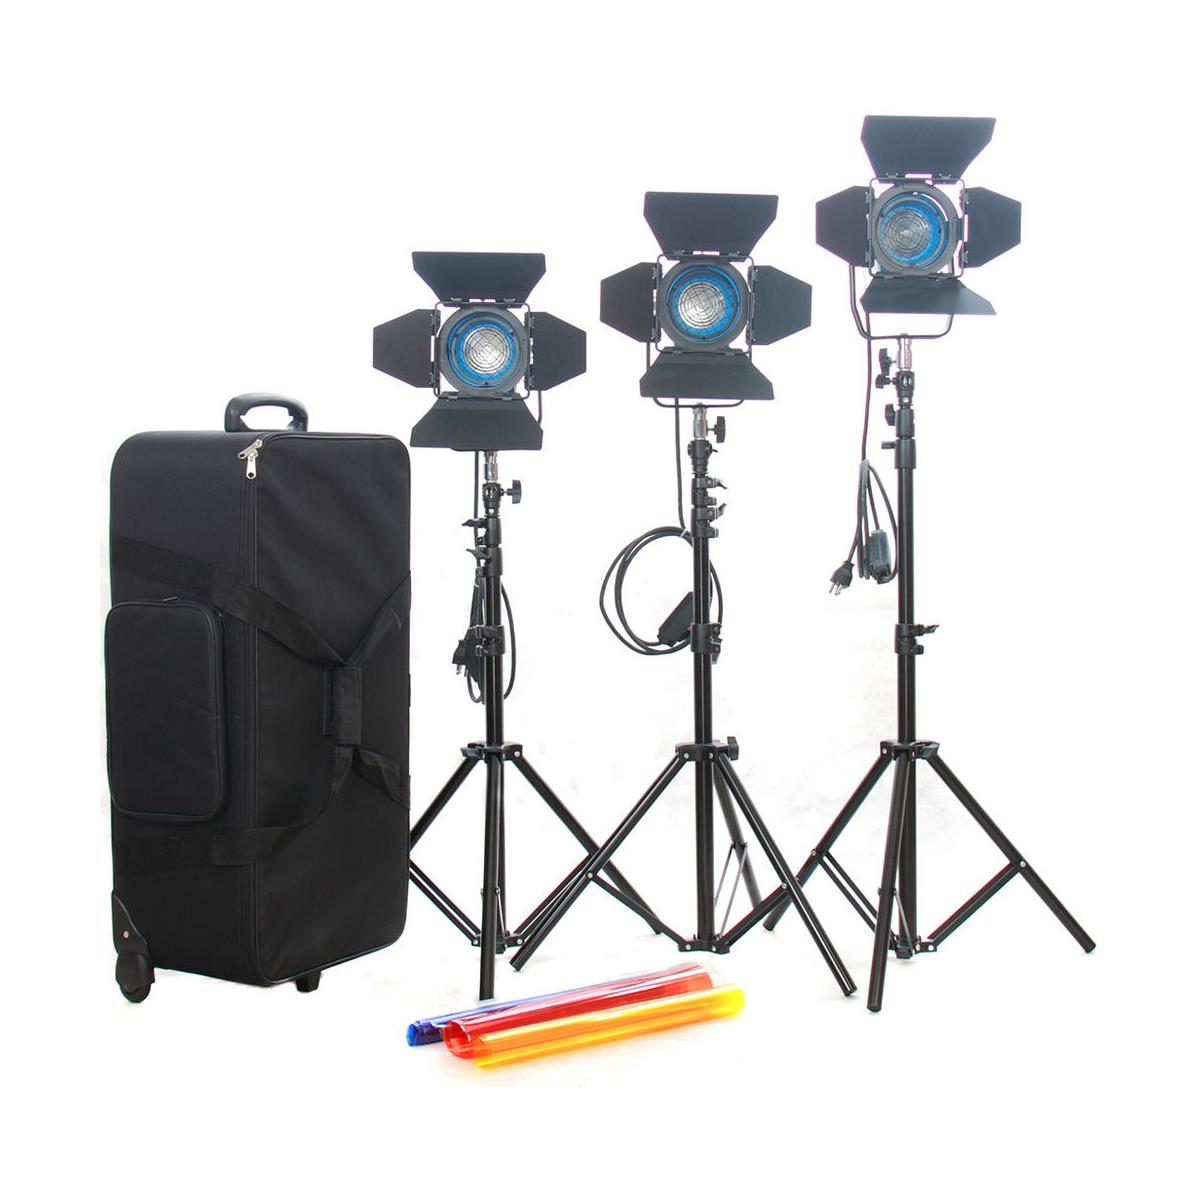 Image of Came-TV 3x 300W/500W Fresnel Tungsten Continuous Spot Video Lights